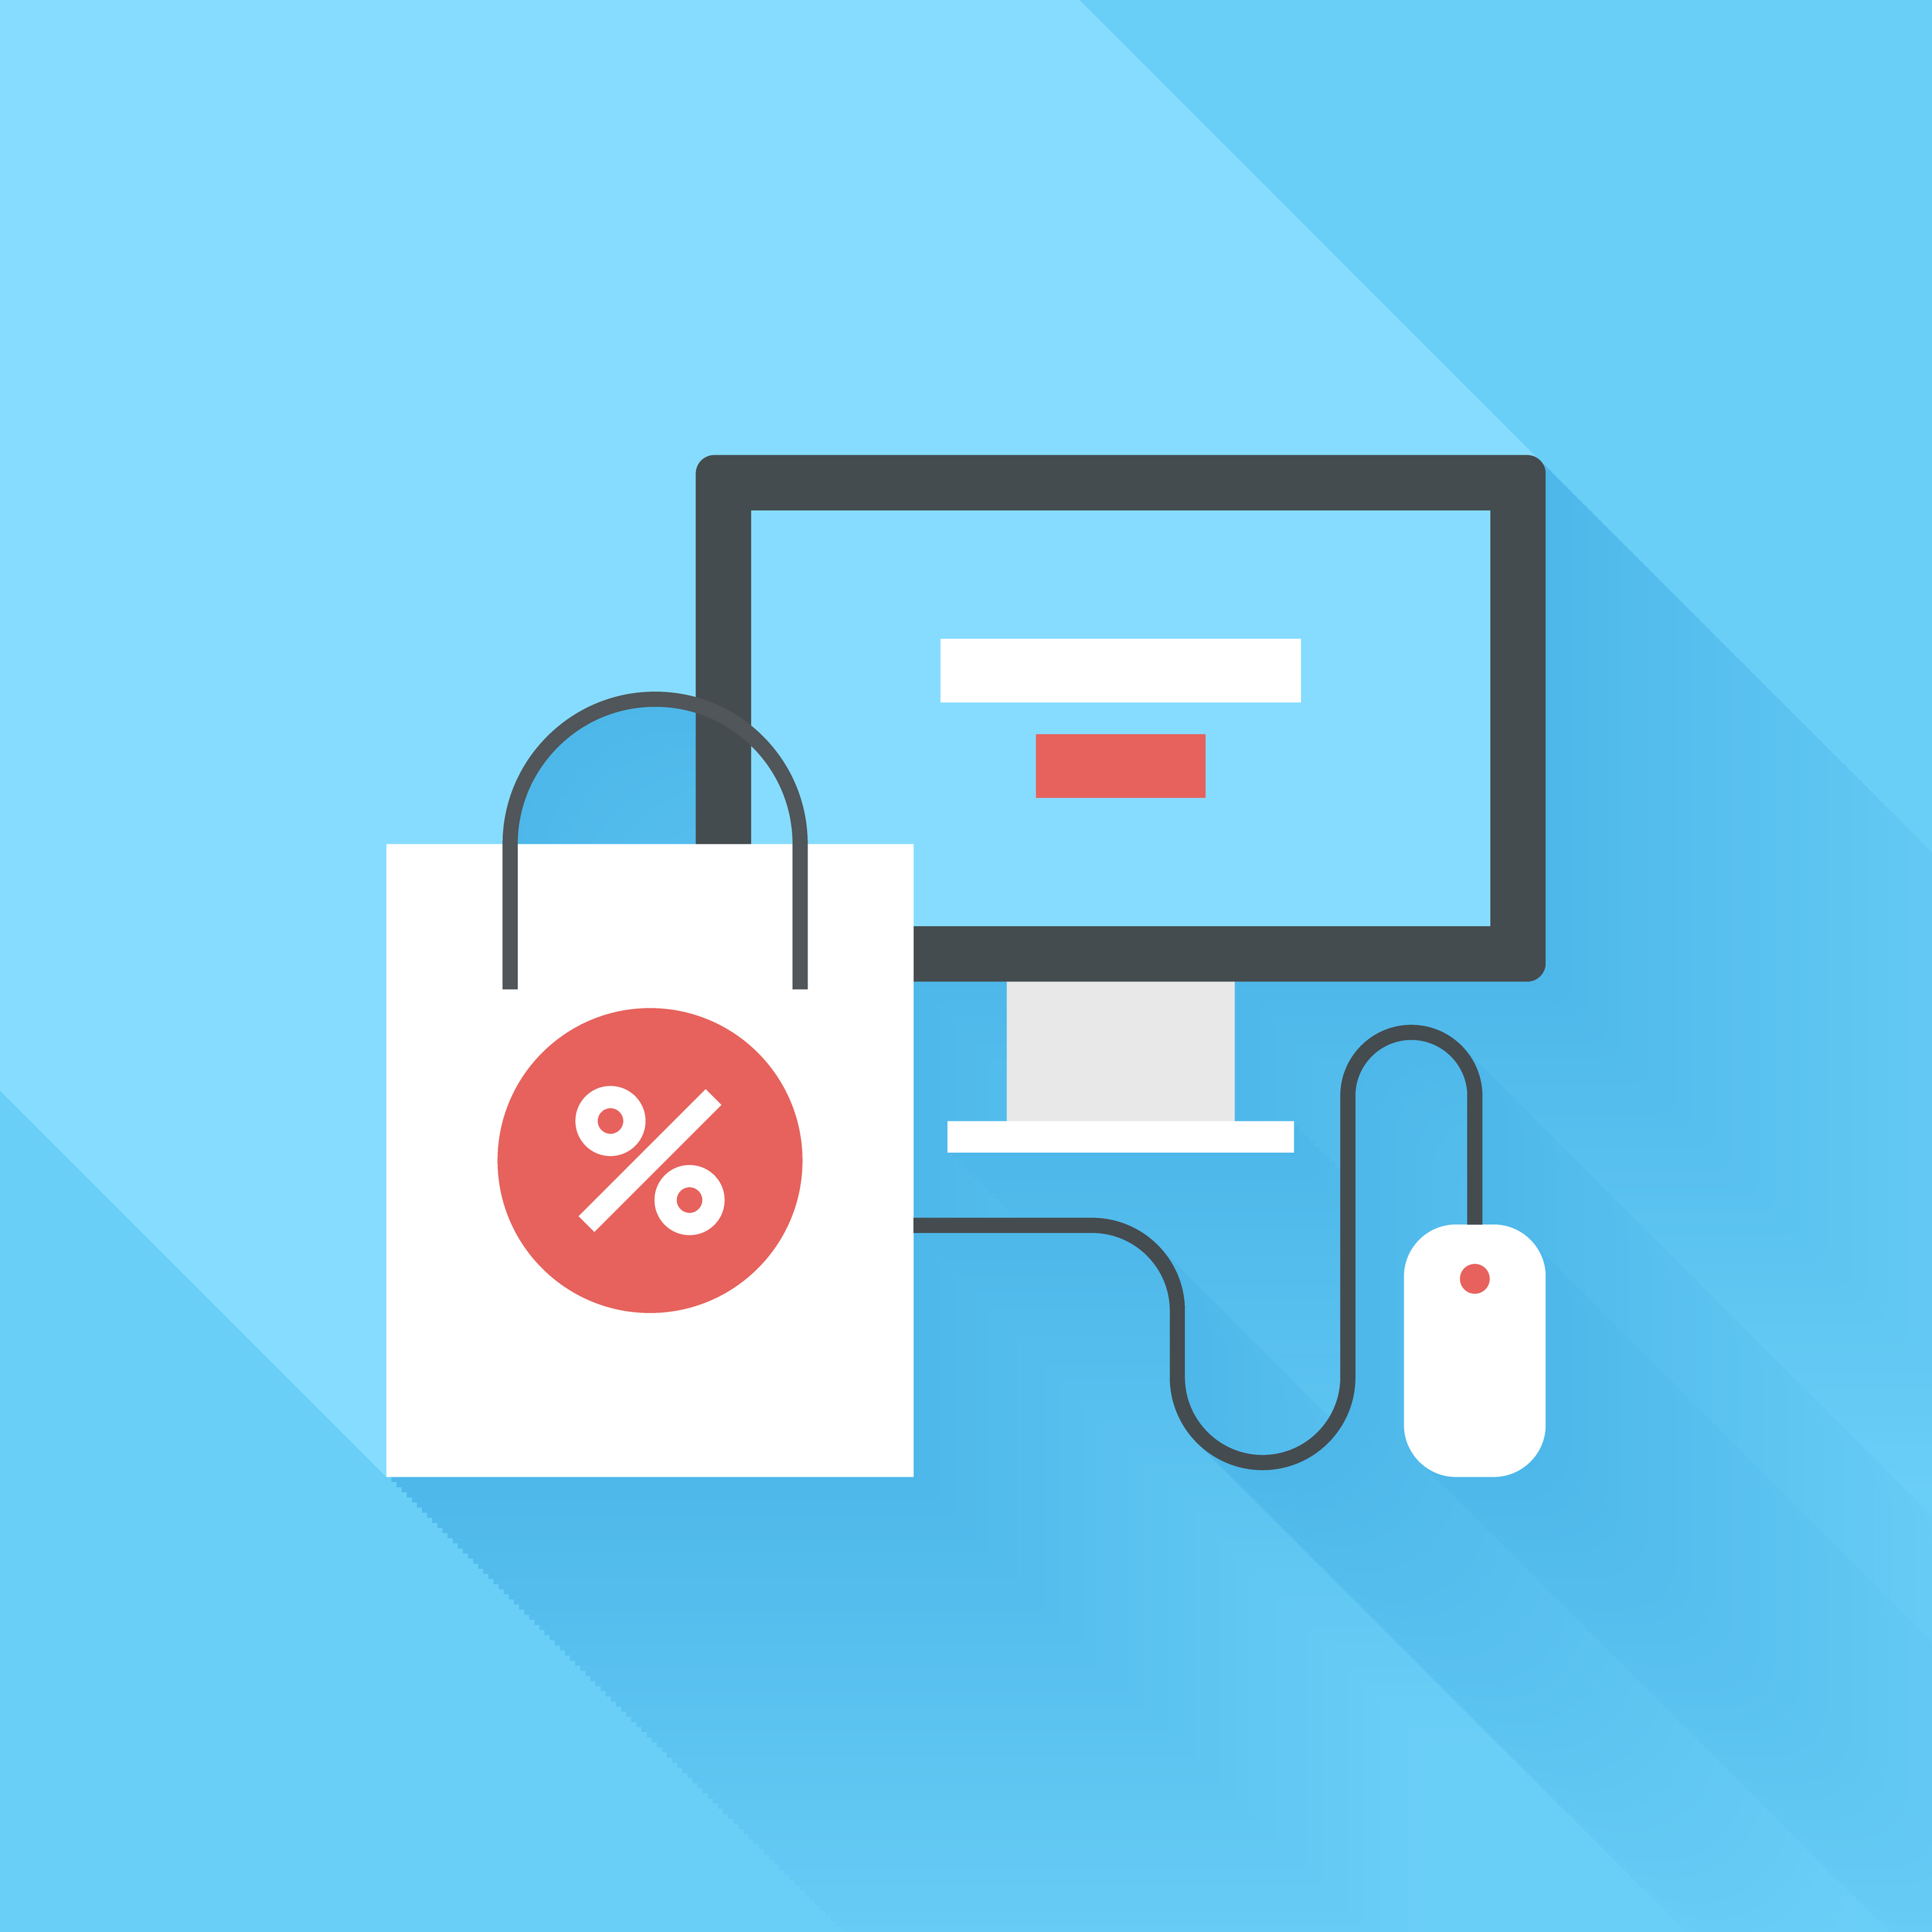 Abstract vector illustration of digital commerce flat design concept.